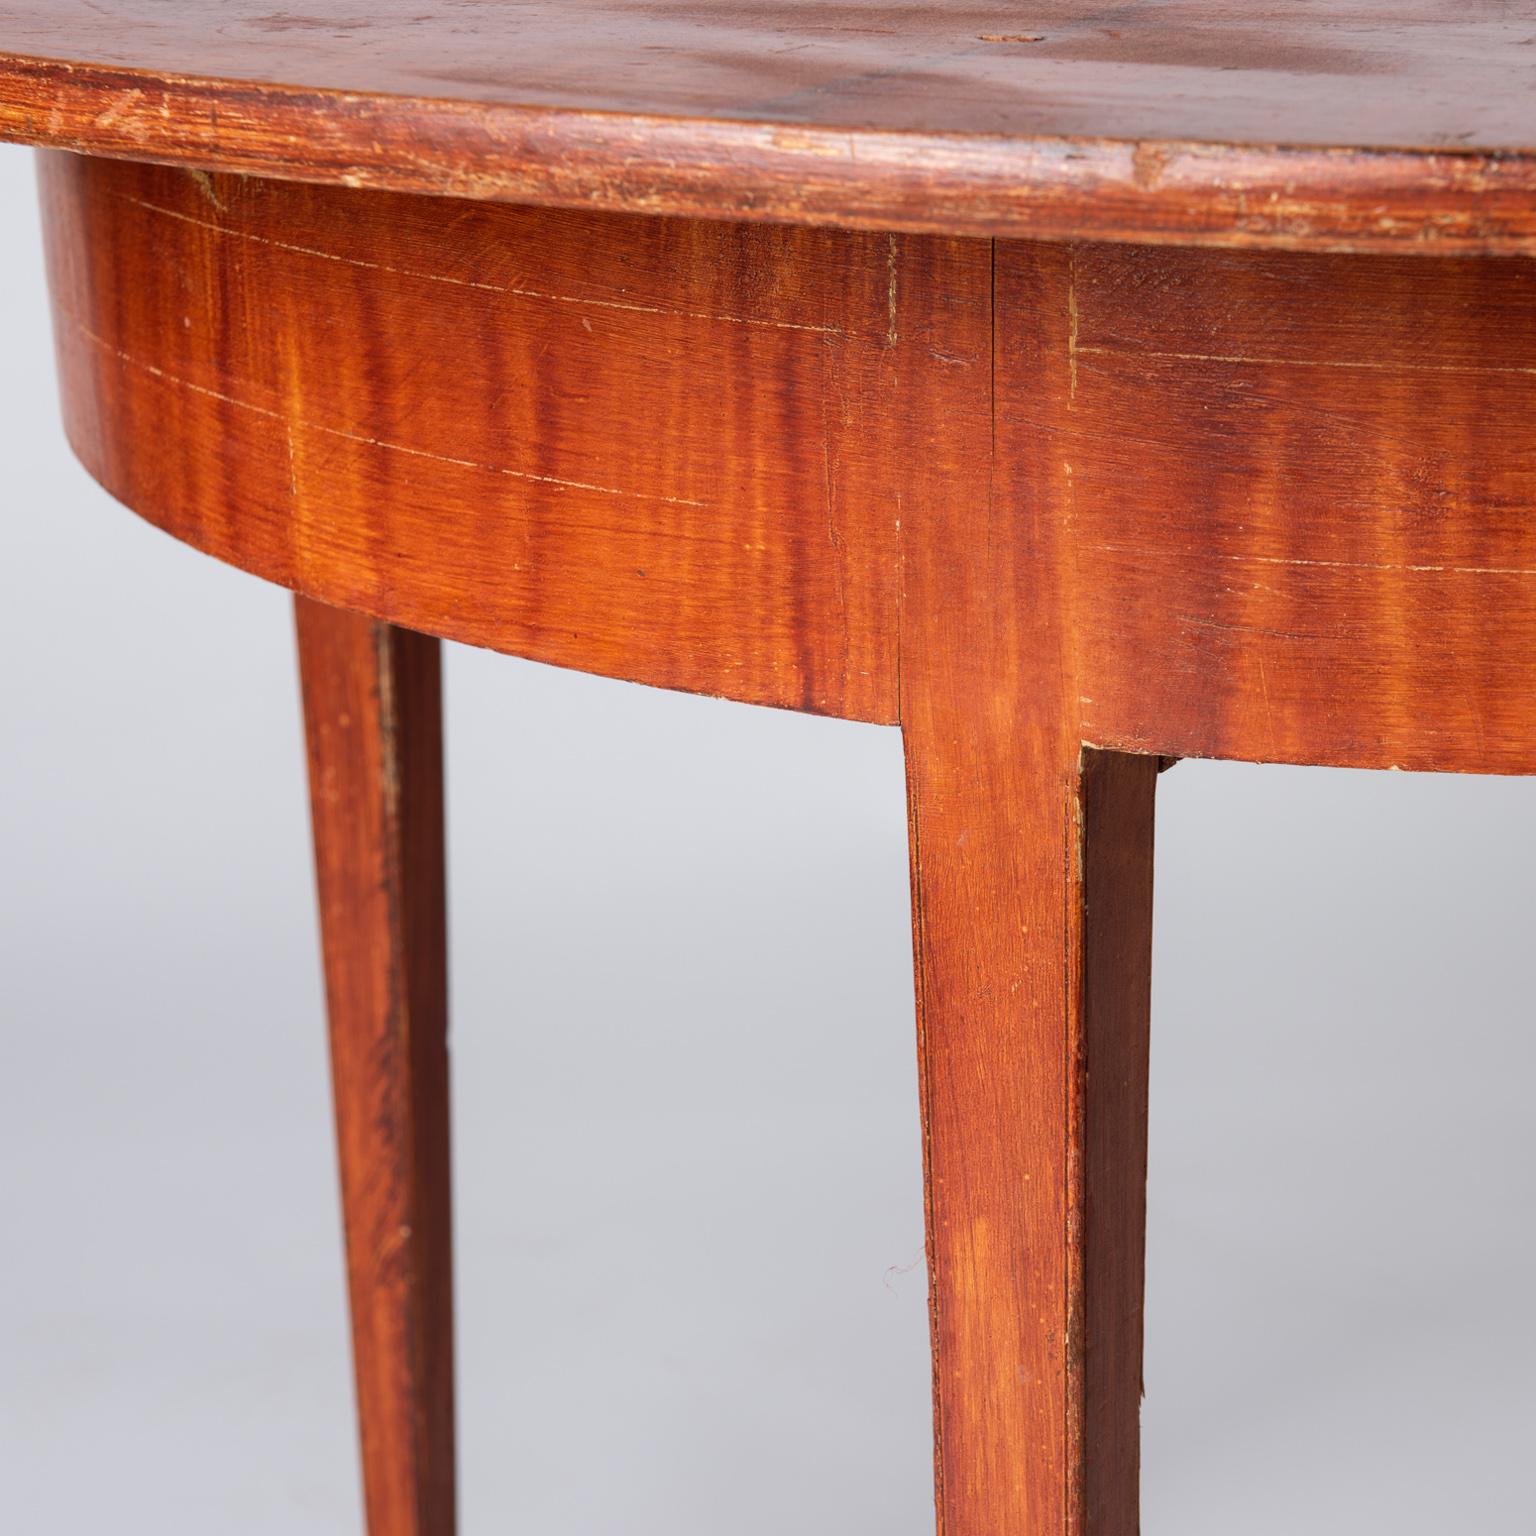 Swedish, Late Gustavian Period, Grain Painted Drop-Leaf Table, circa 1820 For Sale 2